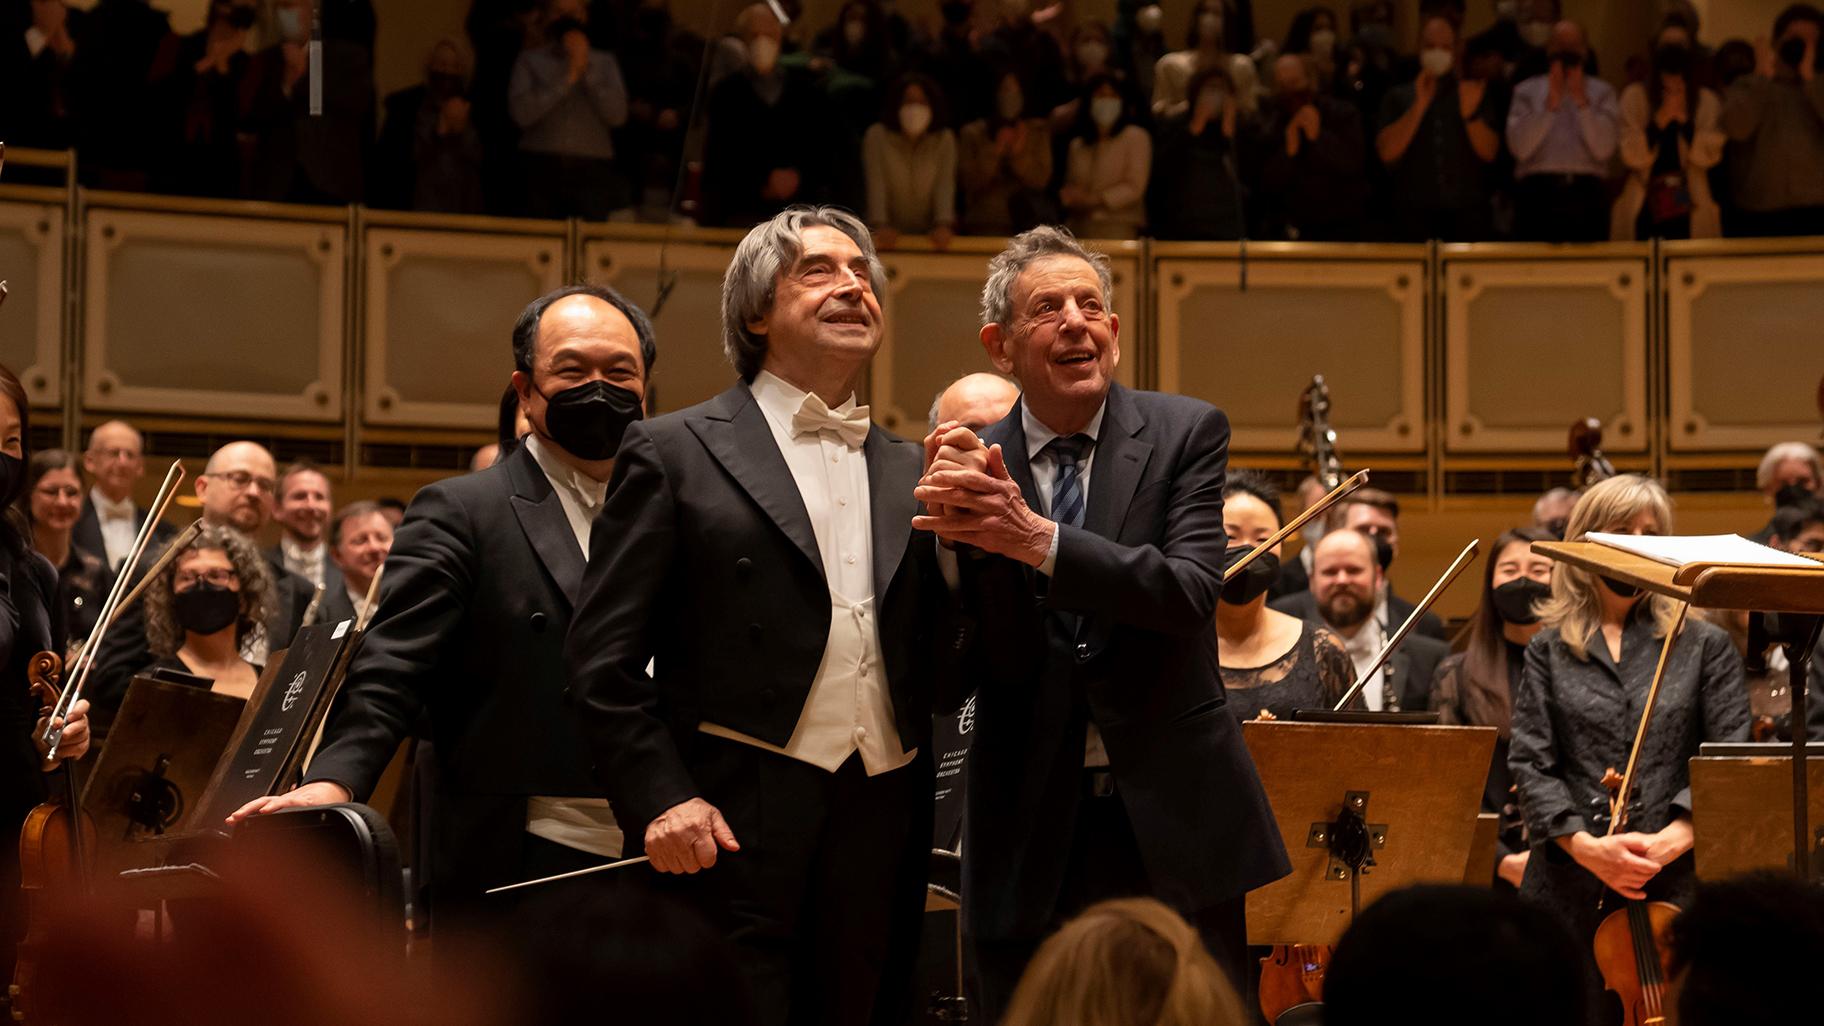 Maestro Muti and Philip Glass at the CSO’s Feb. 19, 2022, performance of Glass’ “Symphony No. 11.” (Credit: Todd Rosenberg Photography)